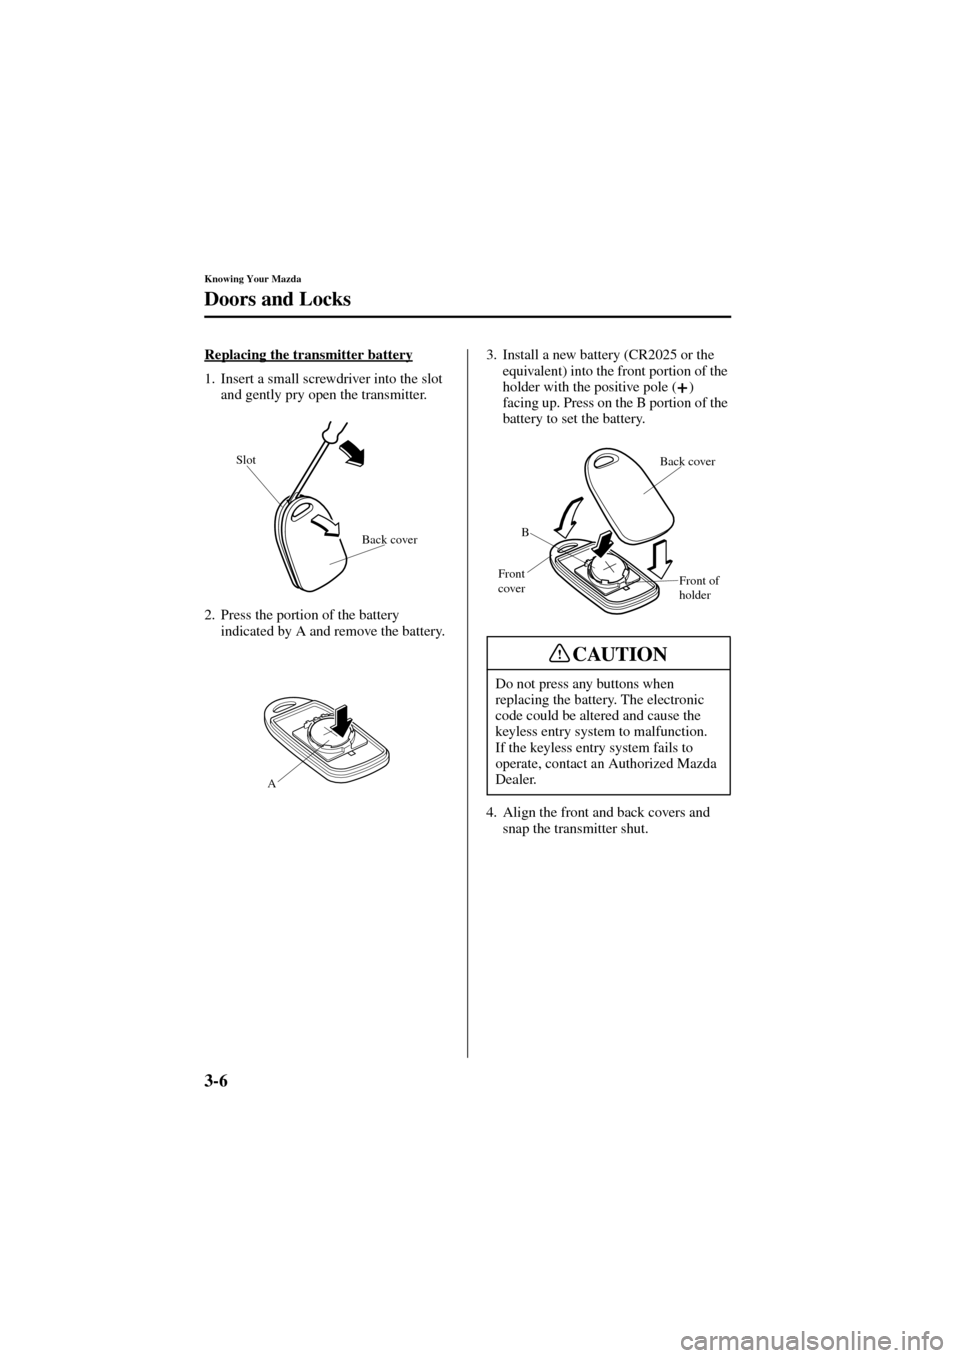 MAZDA MODEL 6 2004  Owners Manual (in English) 3-6
Knowing Your Mazda
Doors and Locks
Form No. 8R29-EA-02I
Replacing the transmitter battery
1. Insert a small screwdriver into the slot 
and gently pry open the transmitter.
2. Press the portion of 